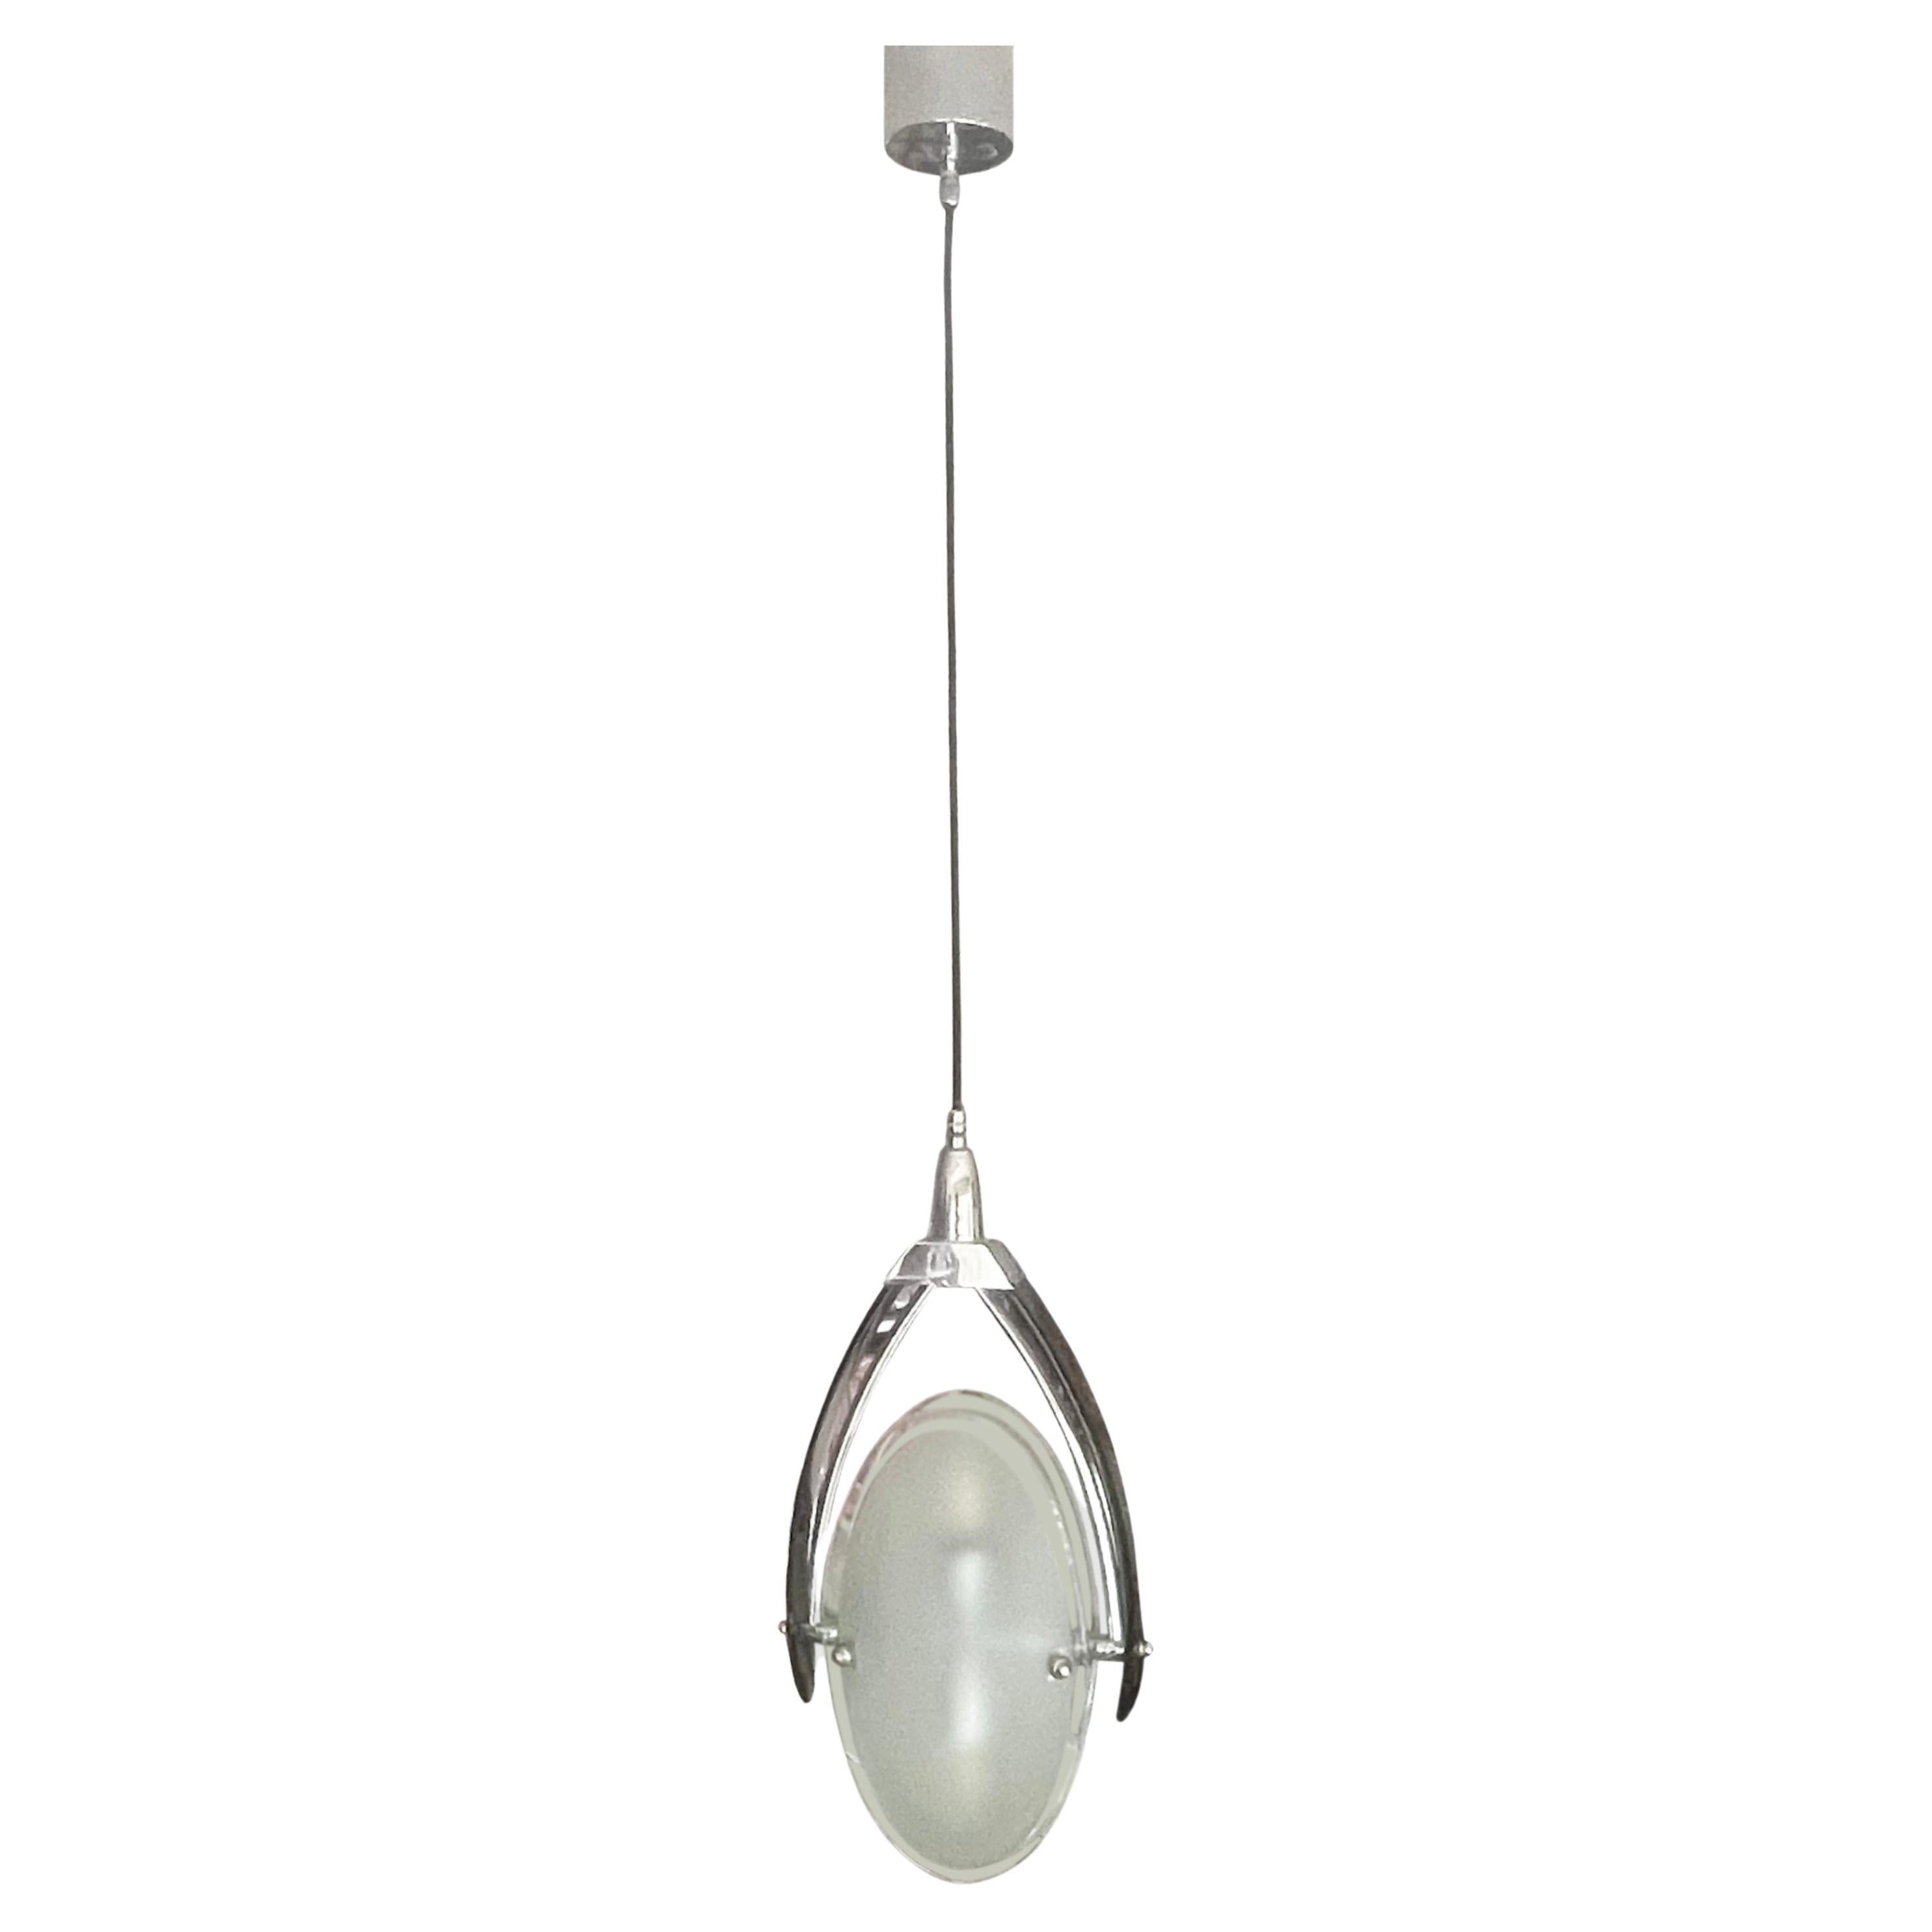 An Italian 1960s classic oval shaped single pendant drop lamp in the style of Fontana Arte.
Two satin glass panels with frosted glass centres are suspended between two curved mid-grey smoked glass arms finished with chrome hardware. 
The central